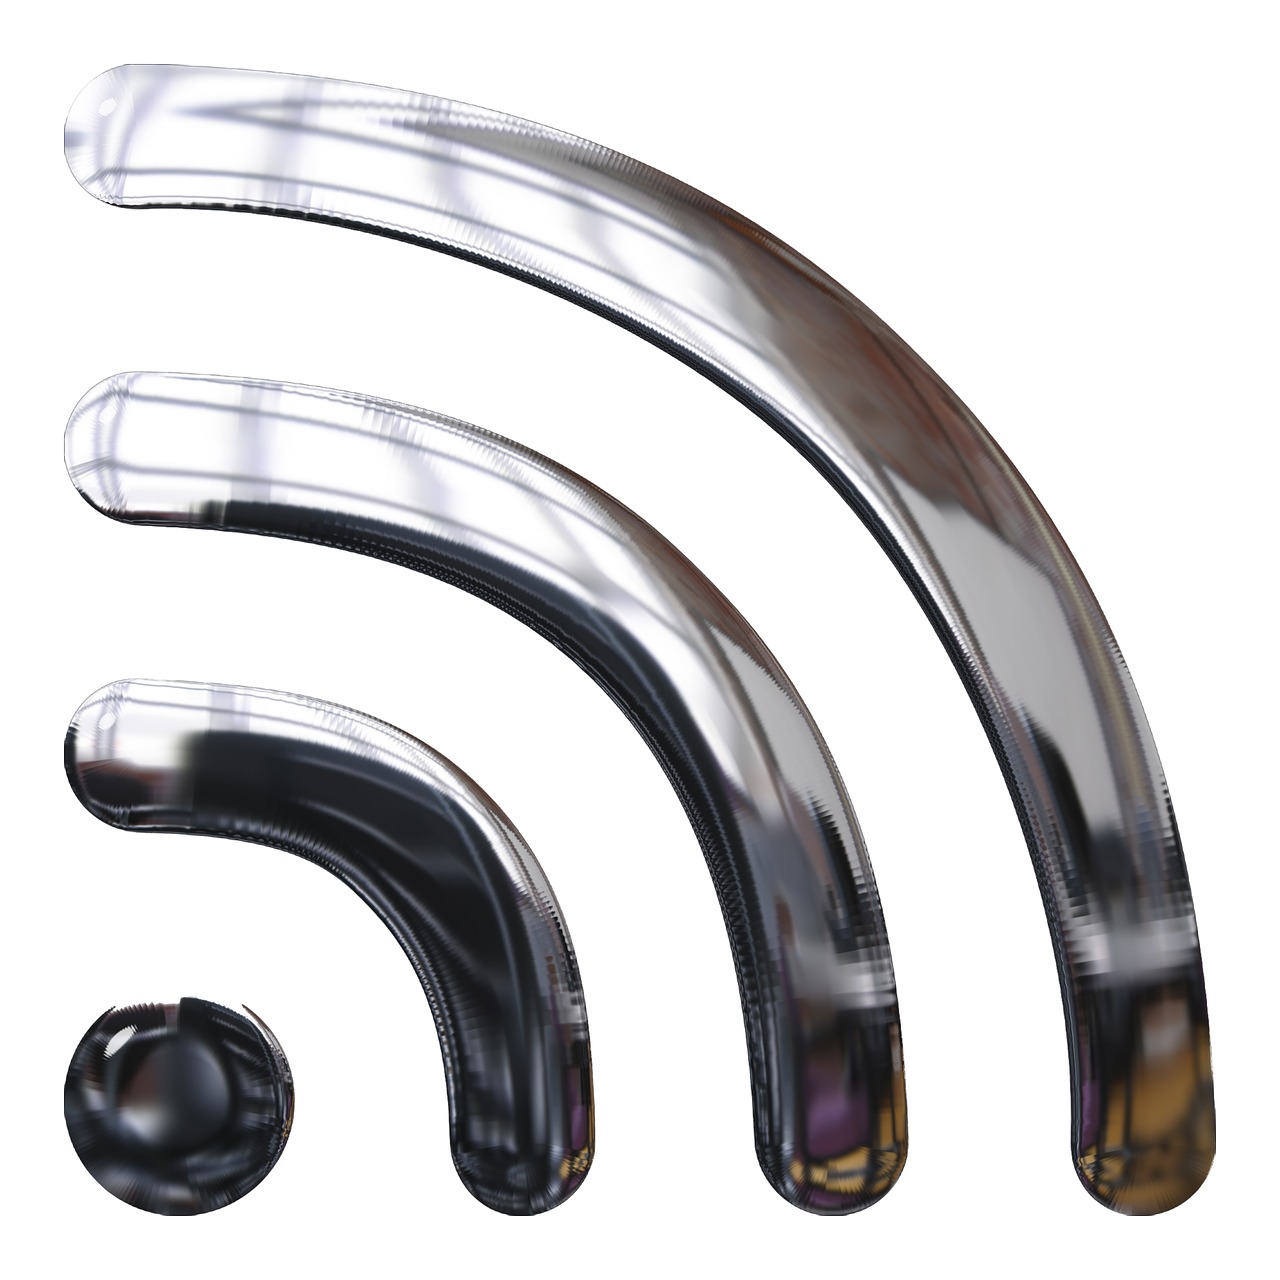 a close up of a metal pipe on a white background, an illustration of, shutterstock, computer art, wifi icon, woamn is curved, various sizes, chrome body